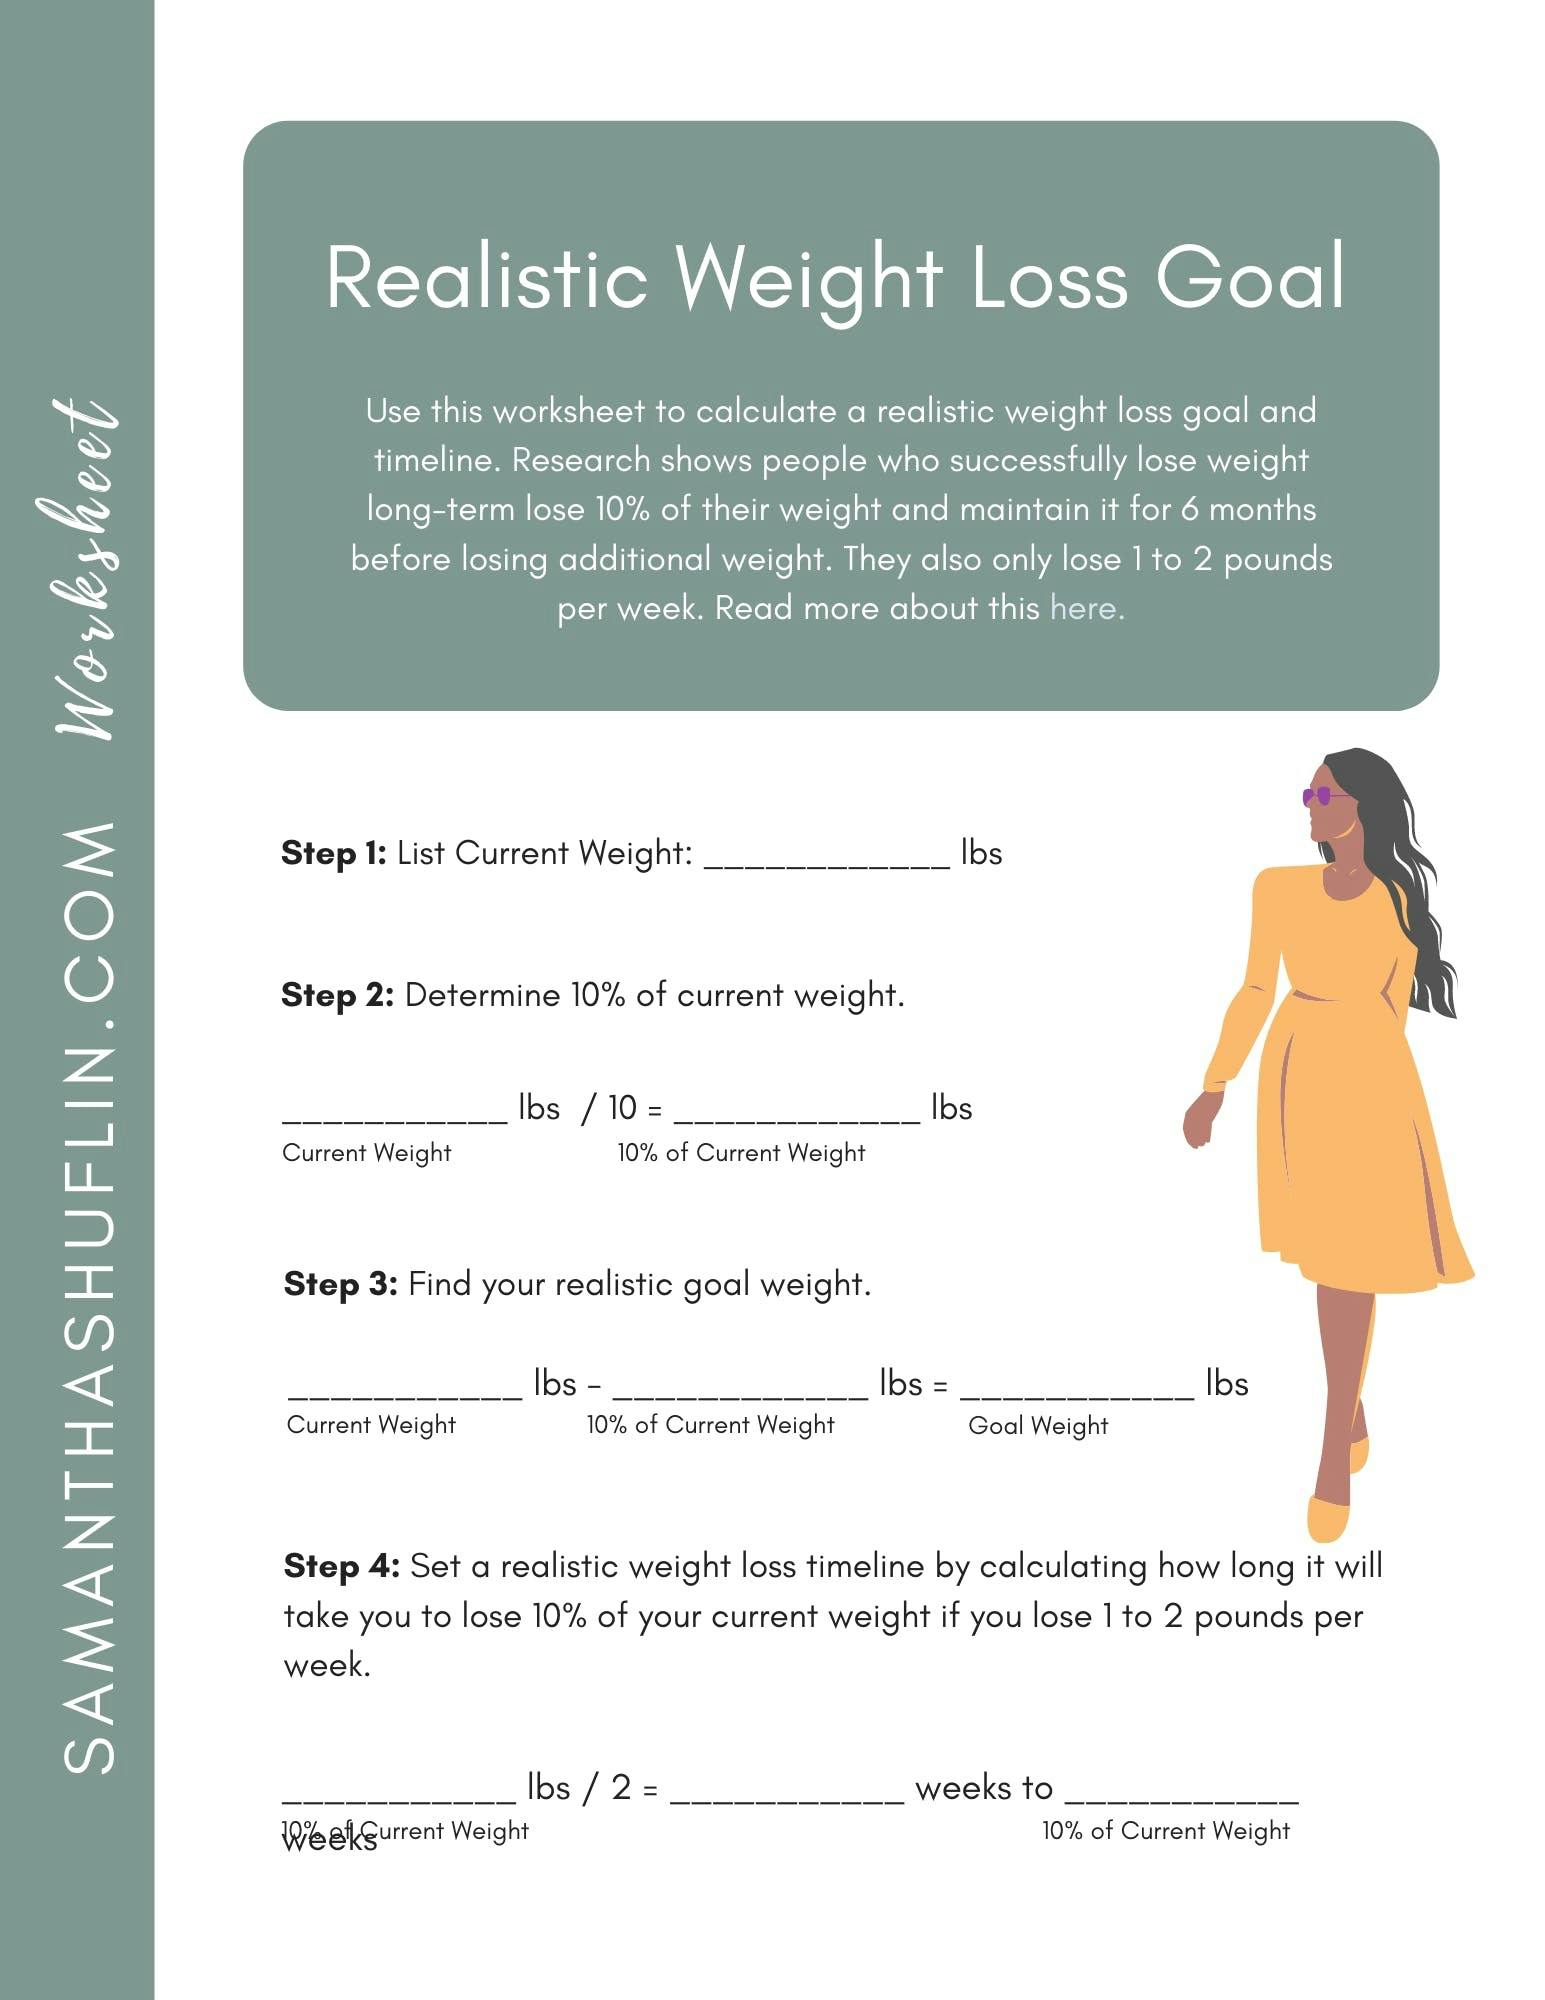 Set Realistic Weight Loss Goals With This Free Worksheet Samantha Shuflin